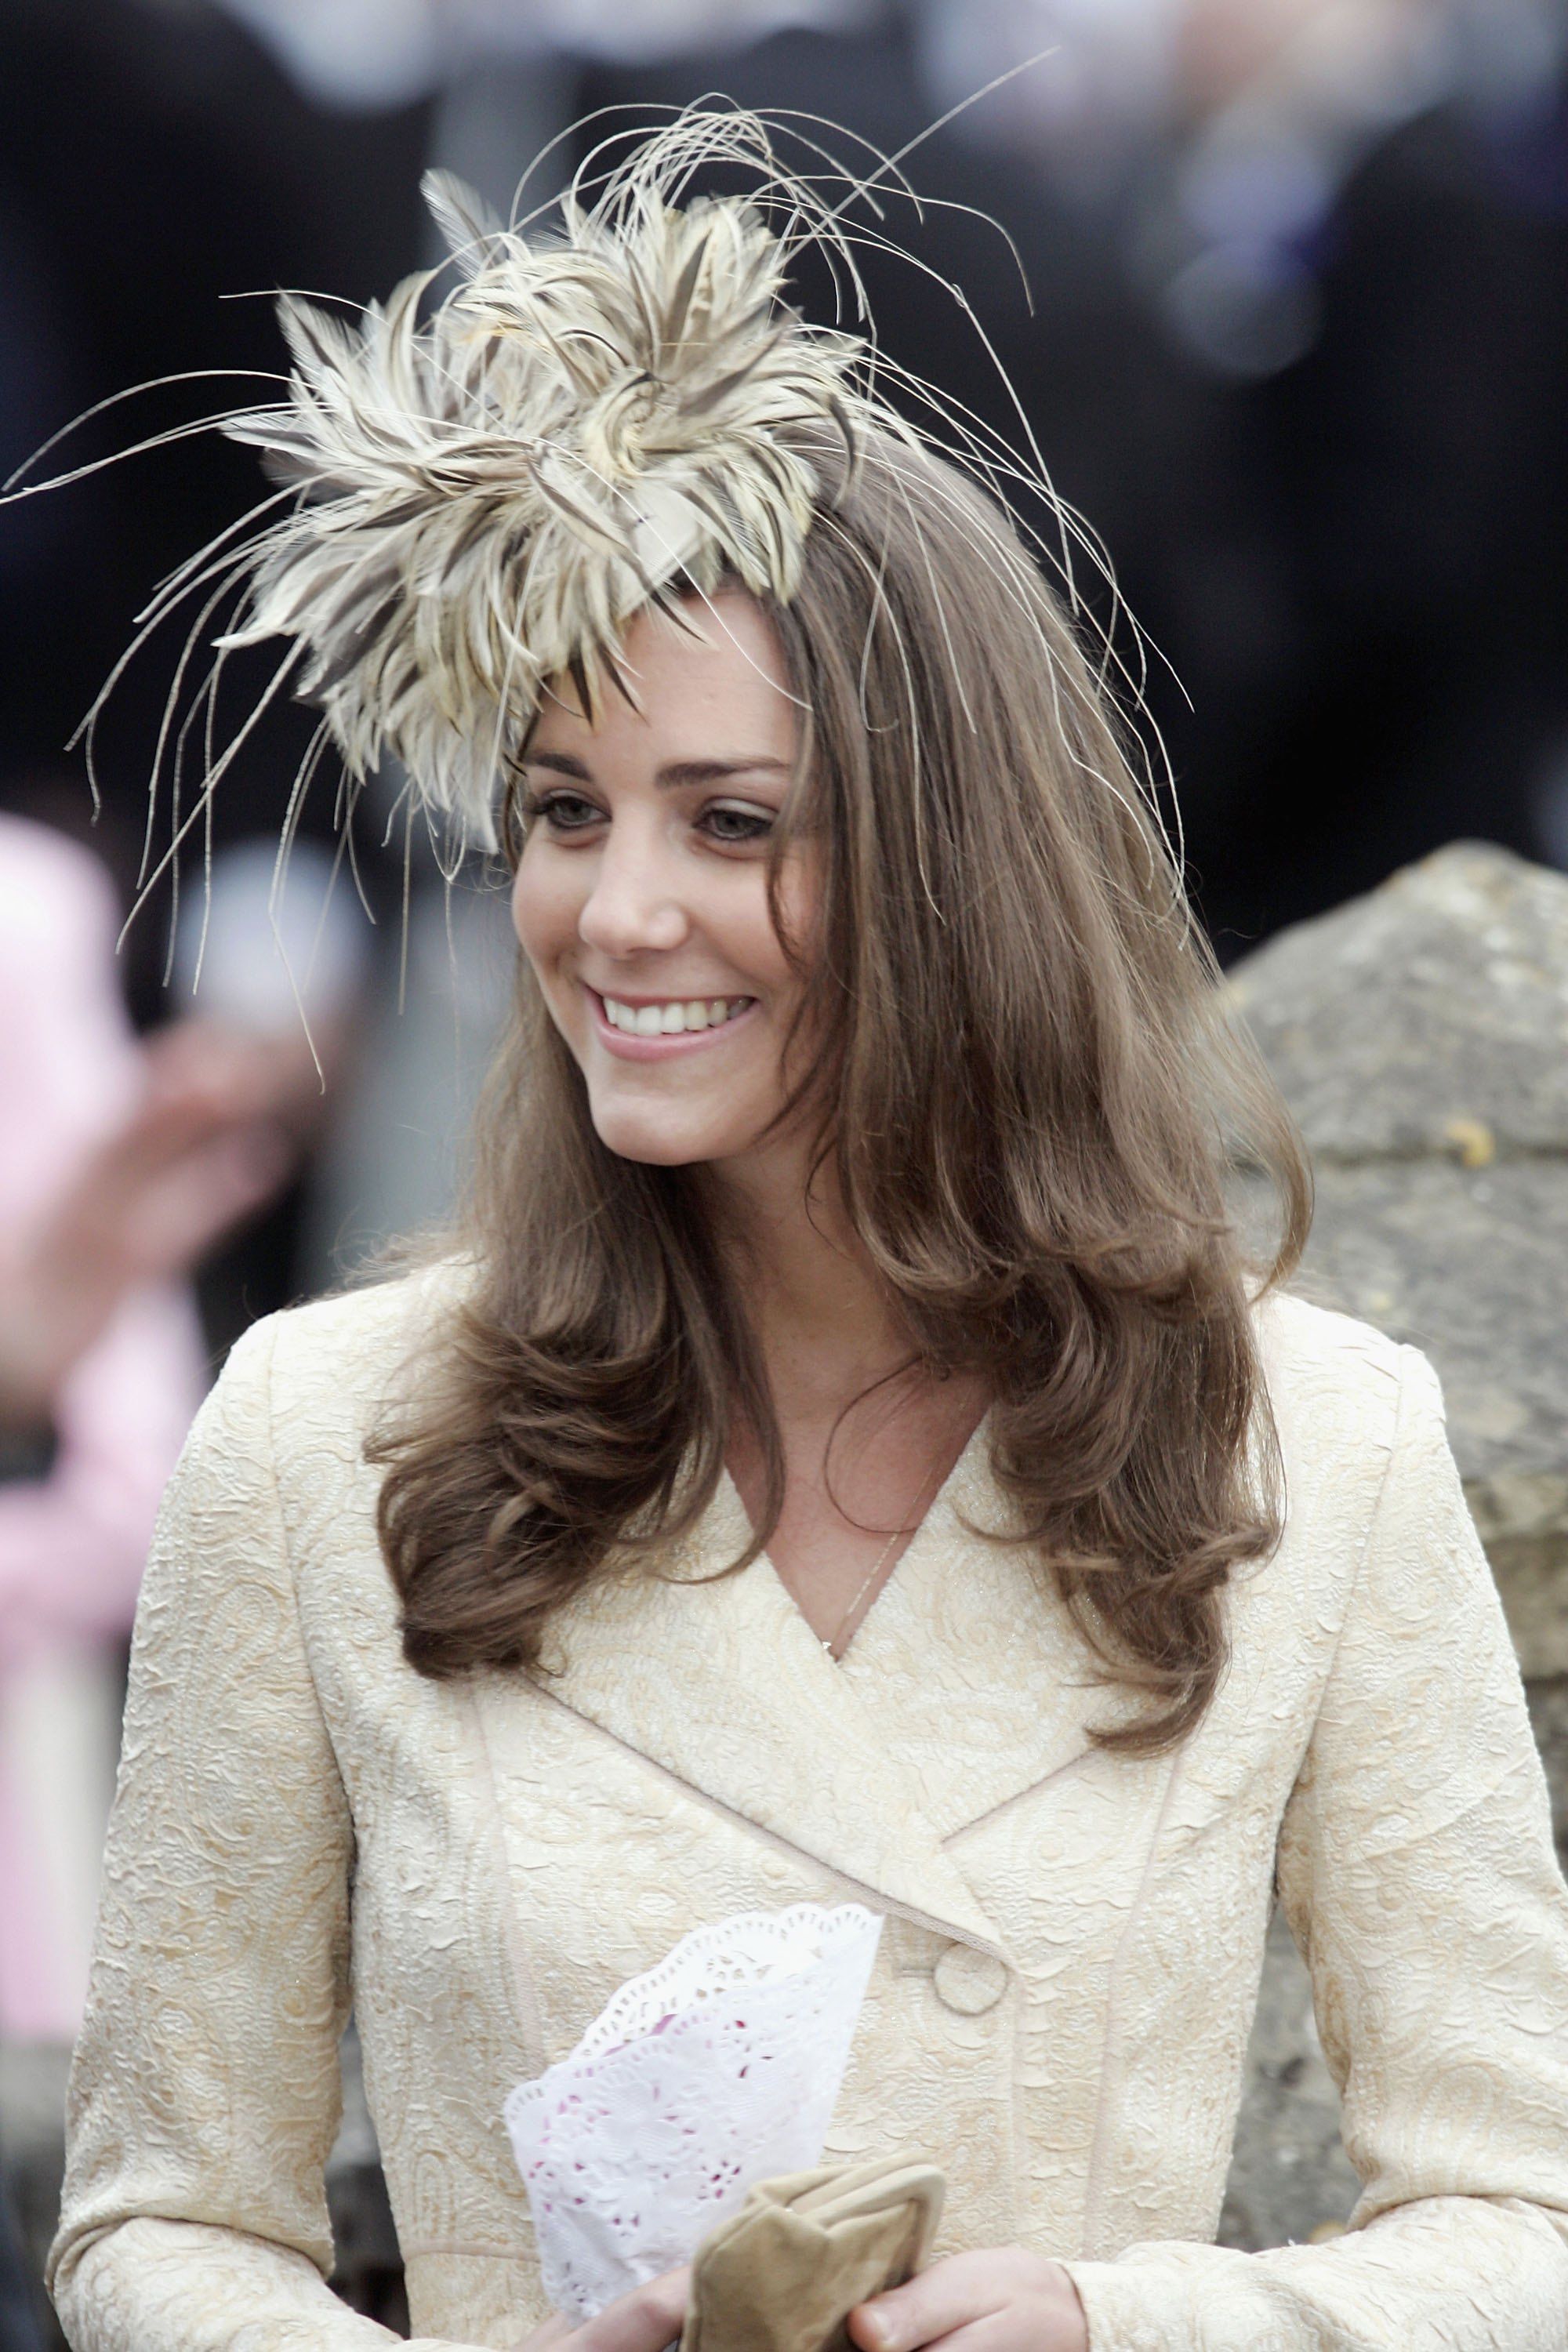 Kate Middleton at the wedding of Laura Parker-Bowles and Harry Lopes on May 6, 2006, in Wiltshire, England | Photo: Tim Graham Photo Library/Getty Images